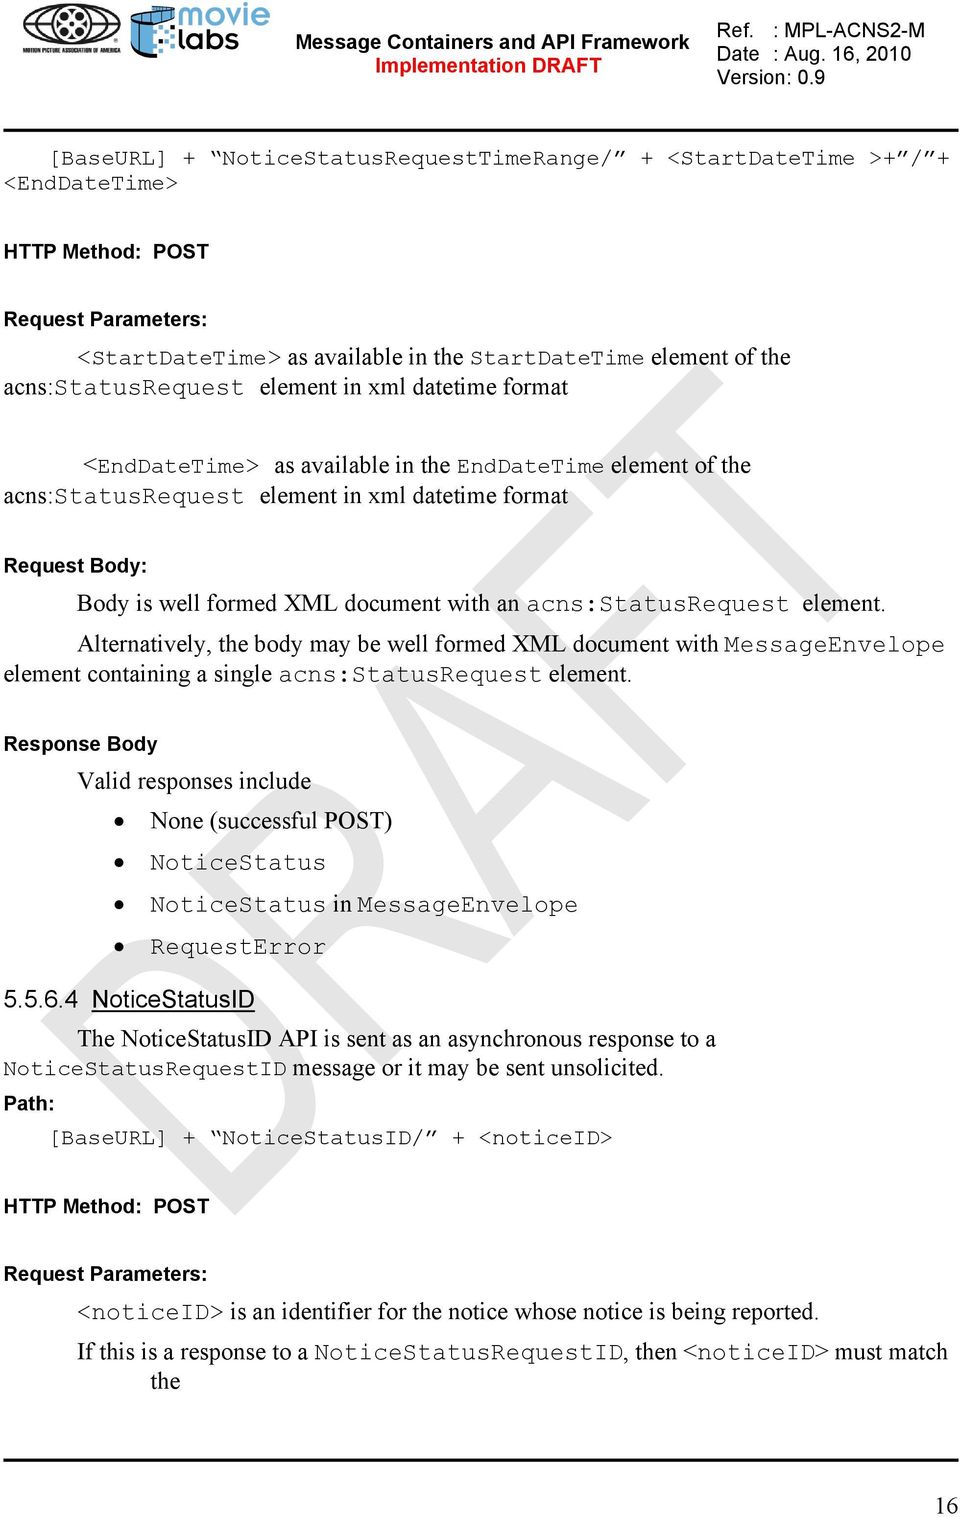 document with an acns:statusrequest element. Alternatively, the body may be well formed XML document with MessageEnvelope element containing a single acns:statusrequest element.